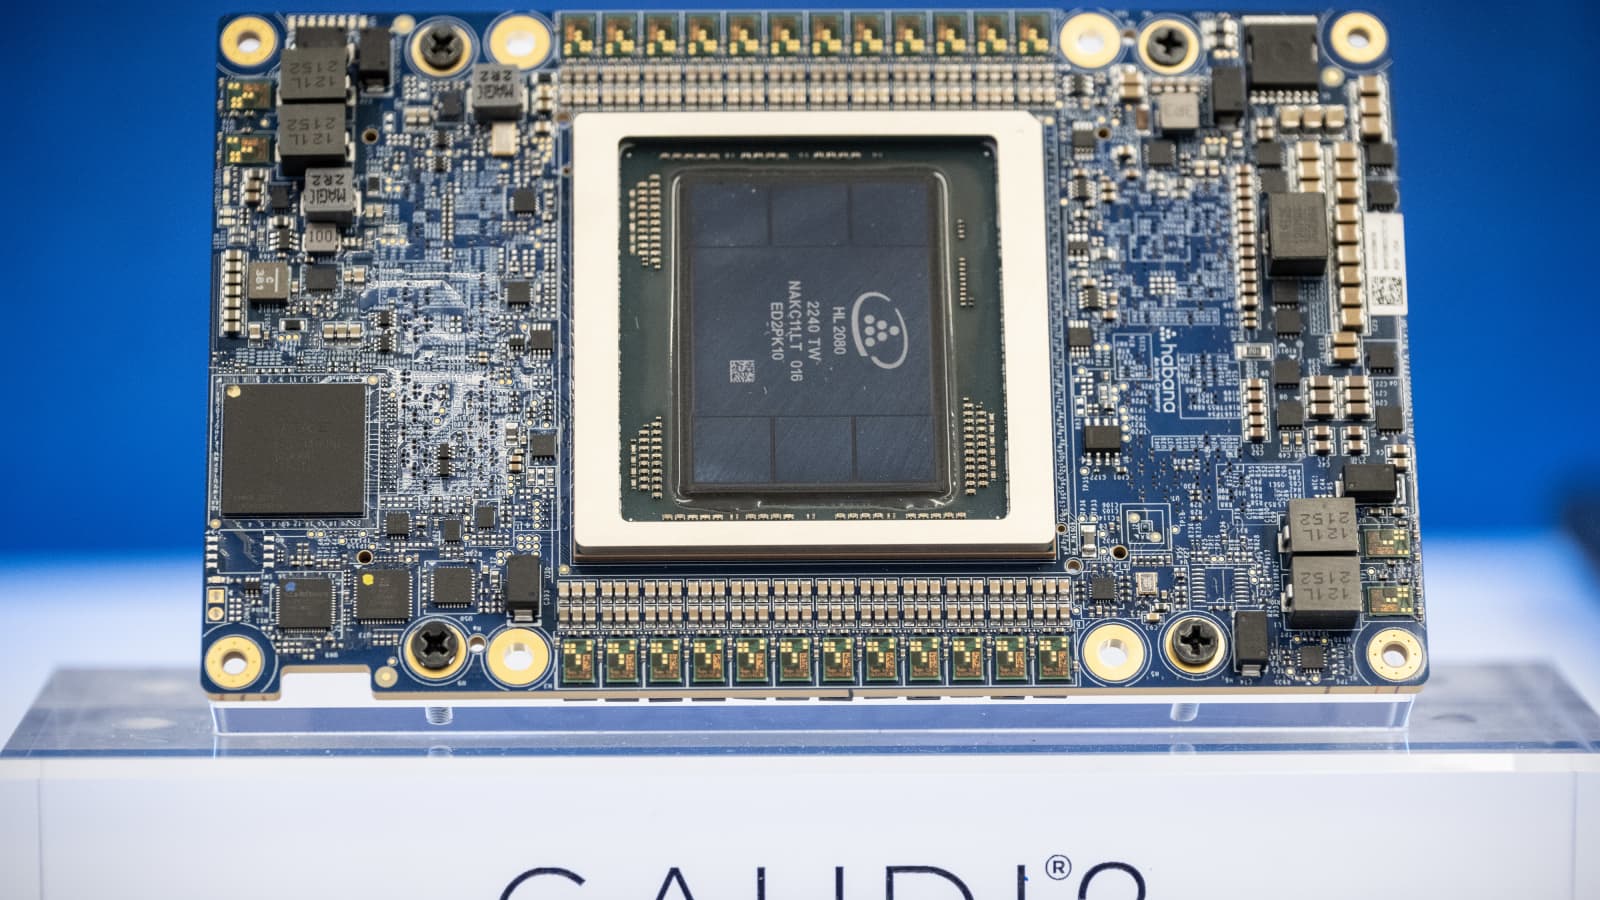 Intel unveils Gaudi3 AI chip to compete with Nvidia and AMD